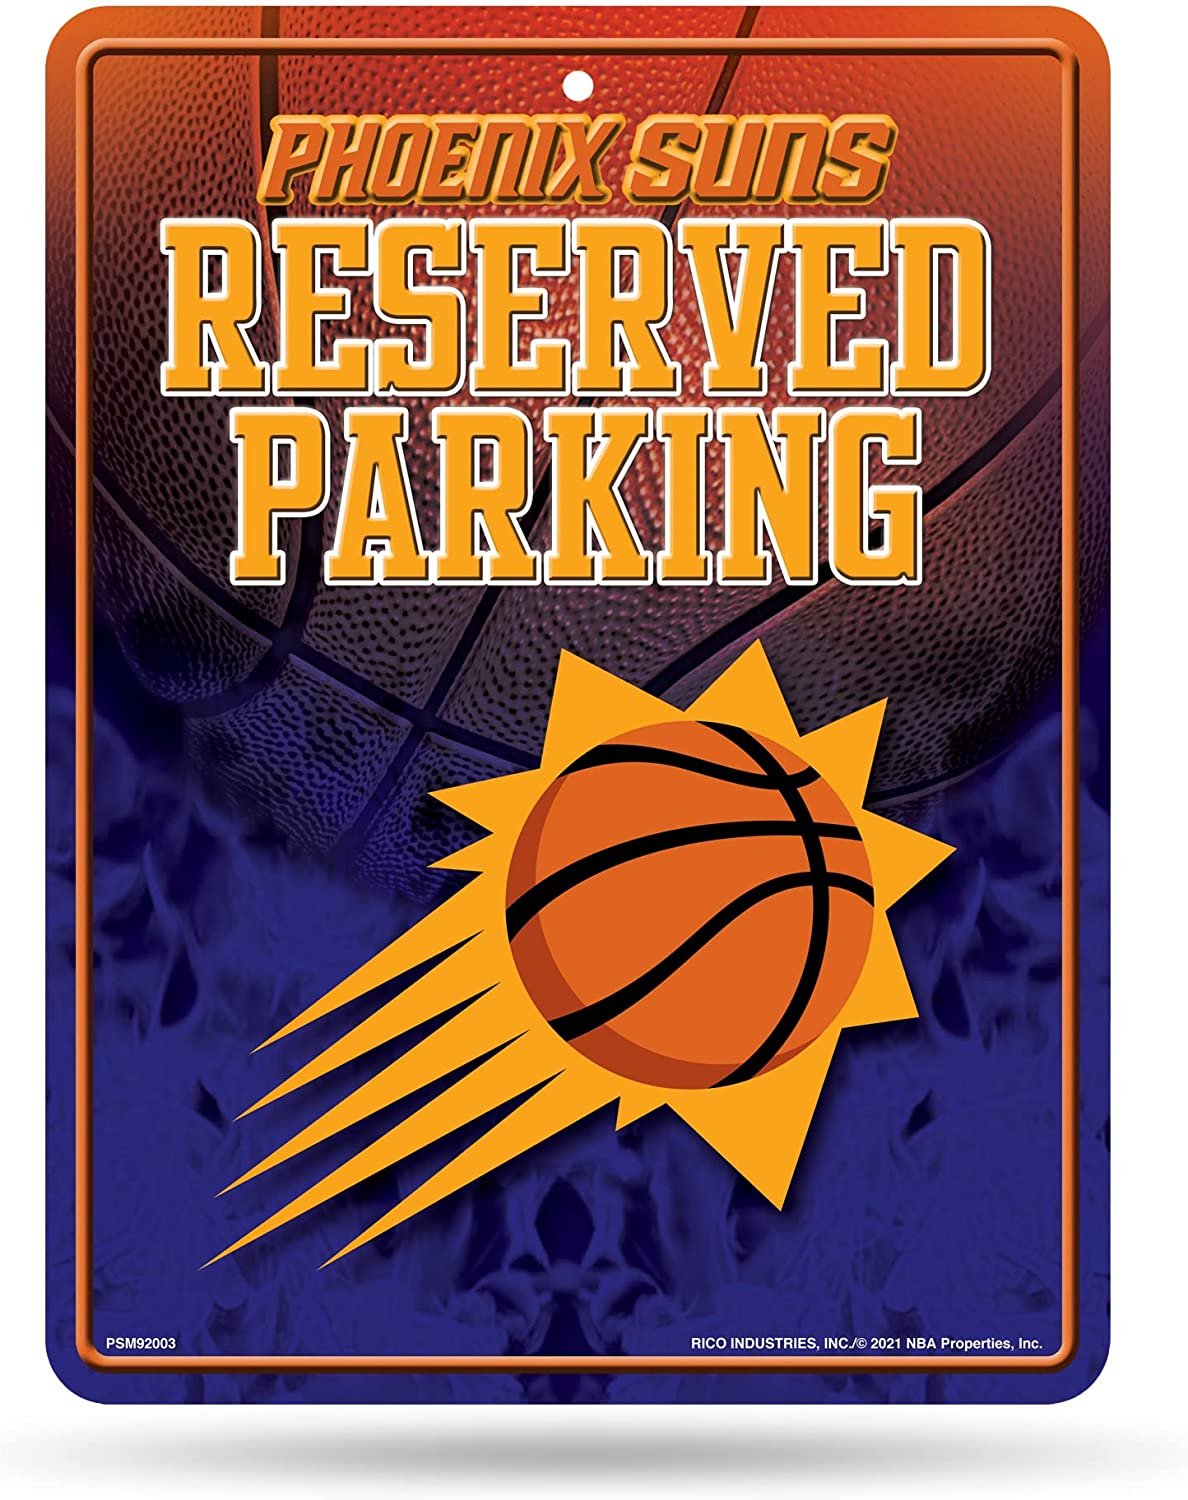 Rico Industries NBA Phoenix Suns 8.5" x 11" Metal Parking Sign - Great for Man Cave, Bed Room, Office, Home Décor